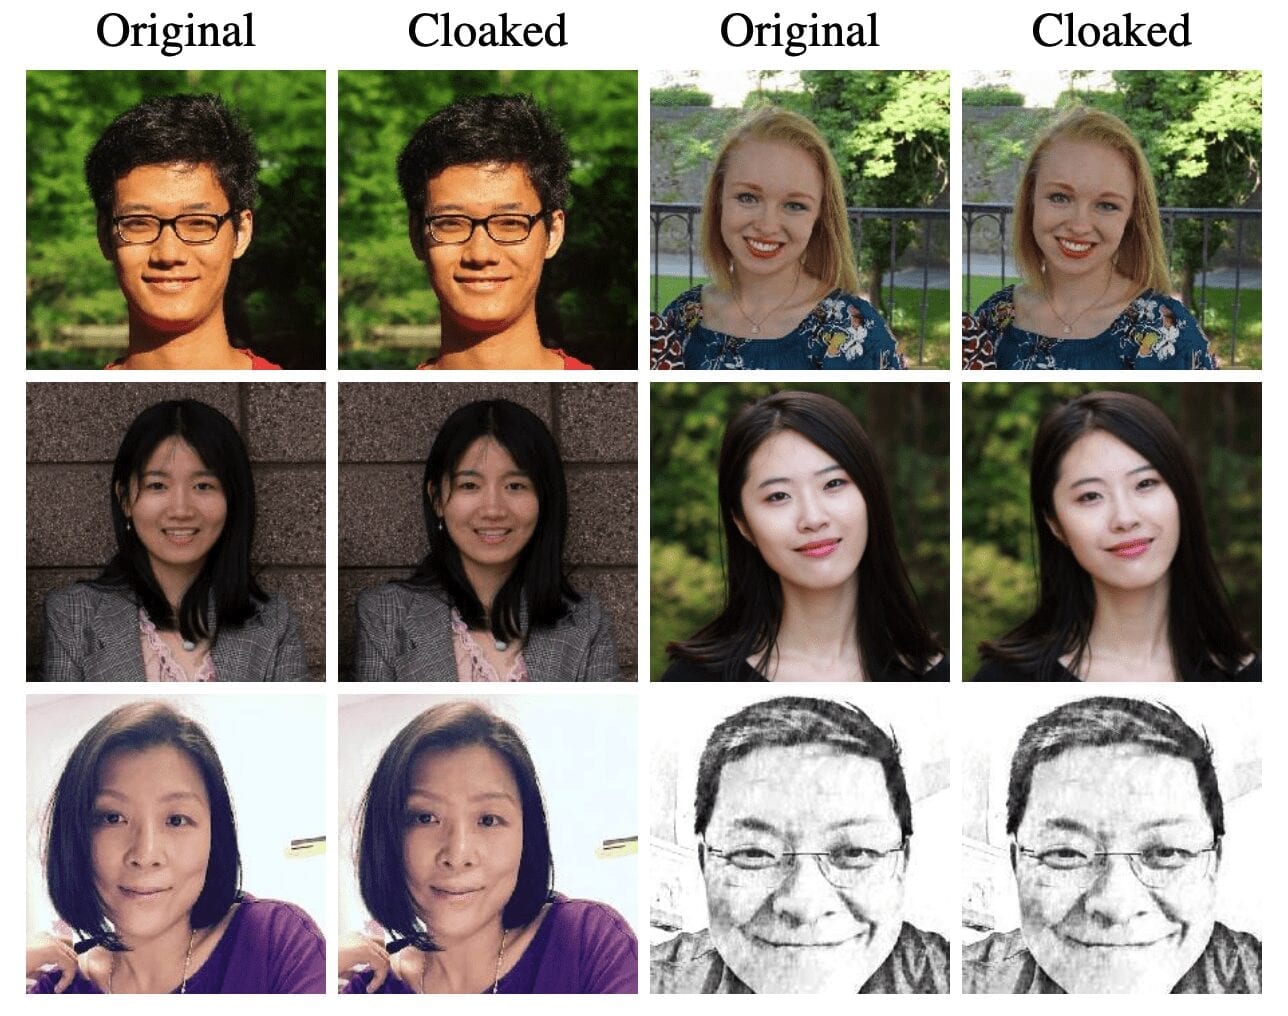 Original and cloaked headshots of the study authors demonstrate how the modifications introduced by Fawkes are invisible to human viewers while disrupting facial recognition software.

Image courtesy of the SAND Lab at UChicago